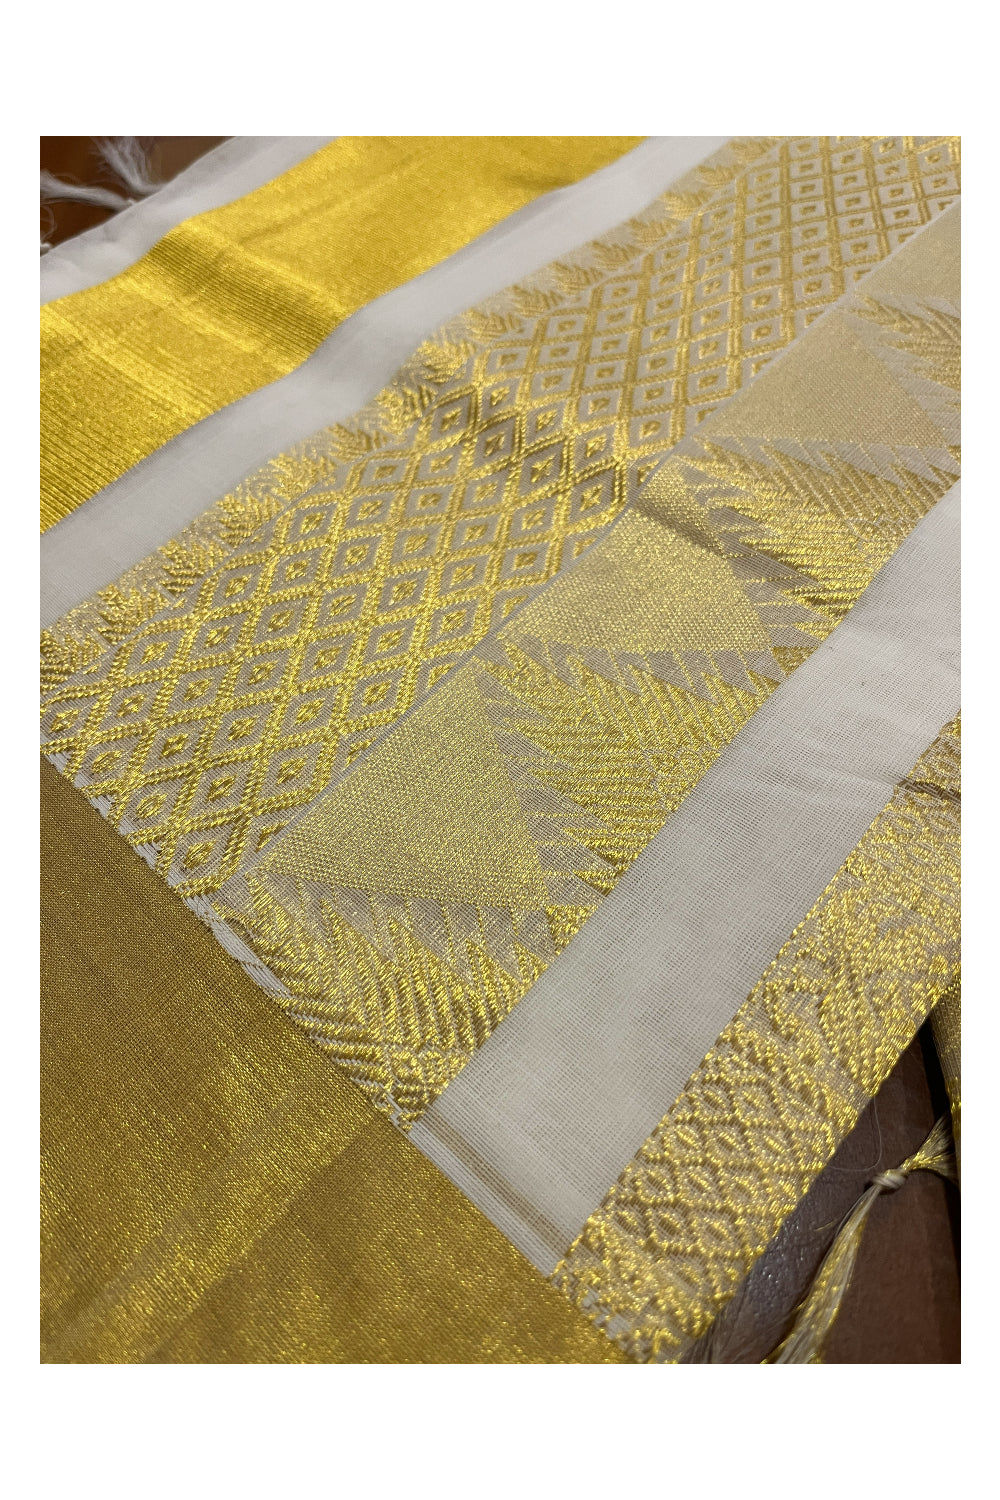 Southloom Premium Handloom Cotton Saree with Heavy Woven Works on Body